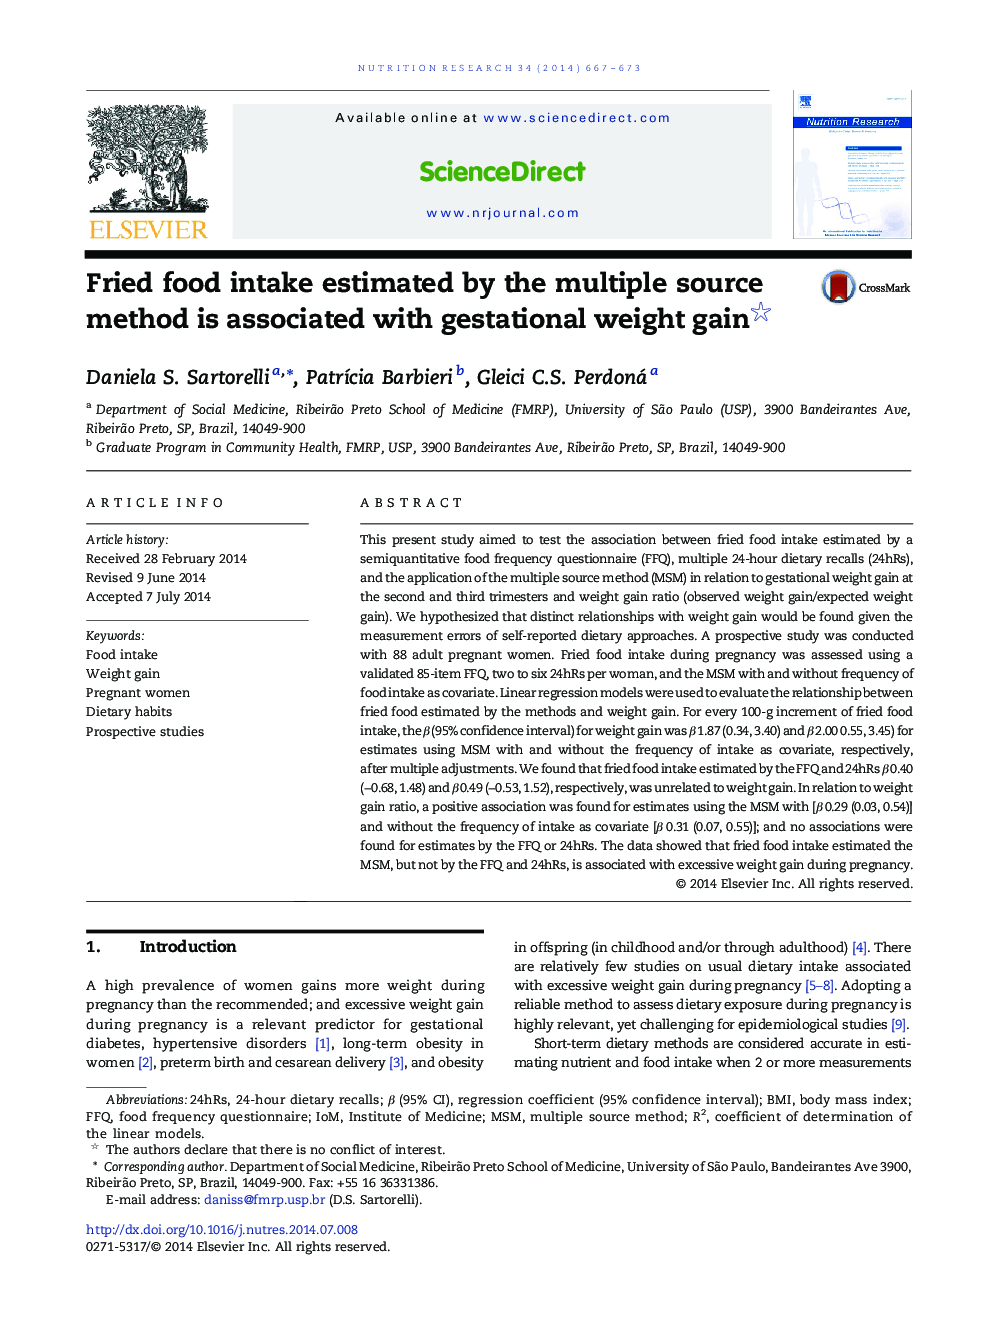 Fried food intake estimated by the multiple source method is associated with gestational weight gain